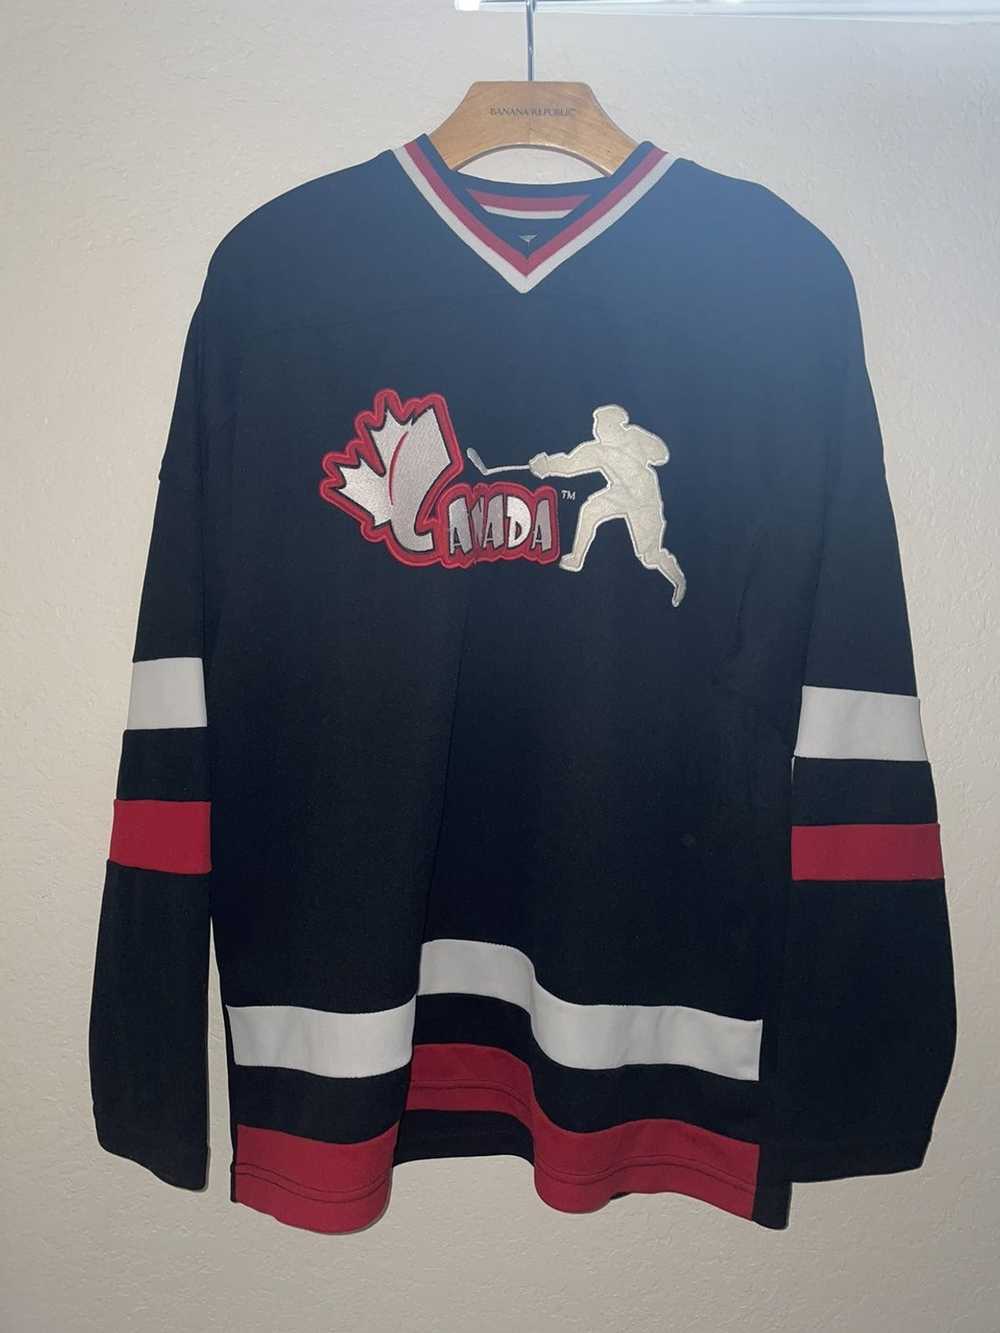 Borizjersey Men's #99 Gretzky Labatt Team Coupe Canada Cup Ice Hockey Jersey Stitched Size S